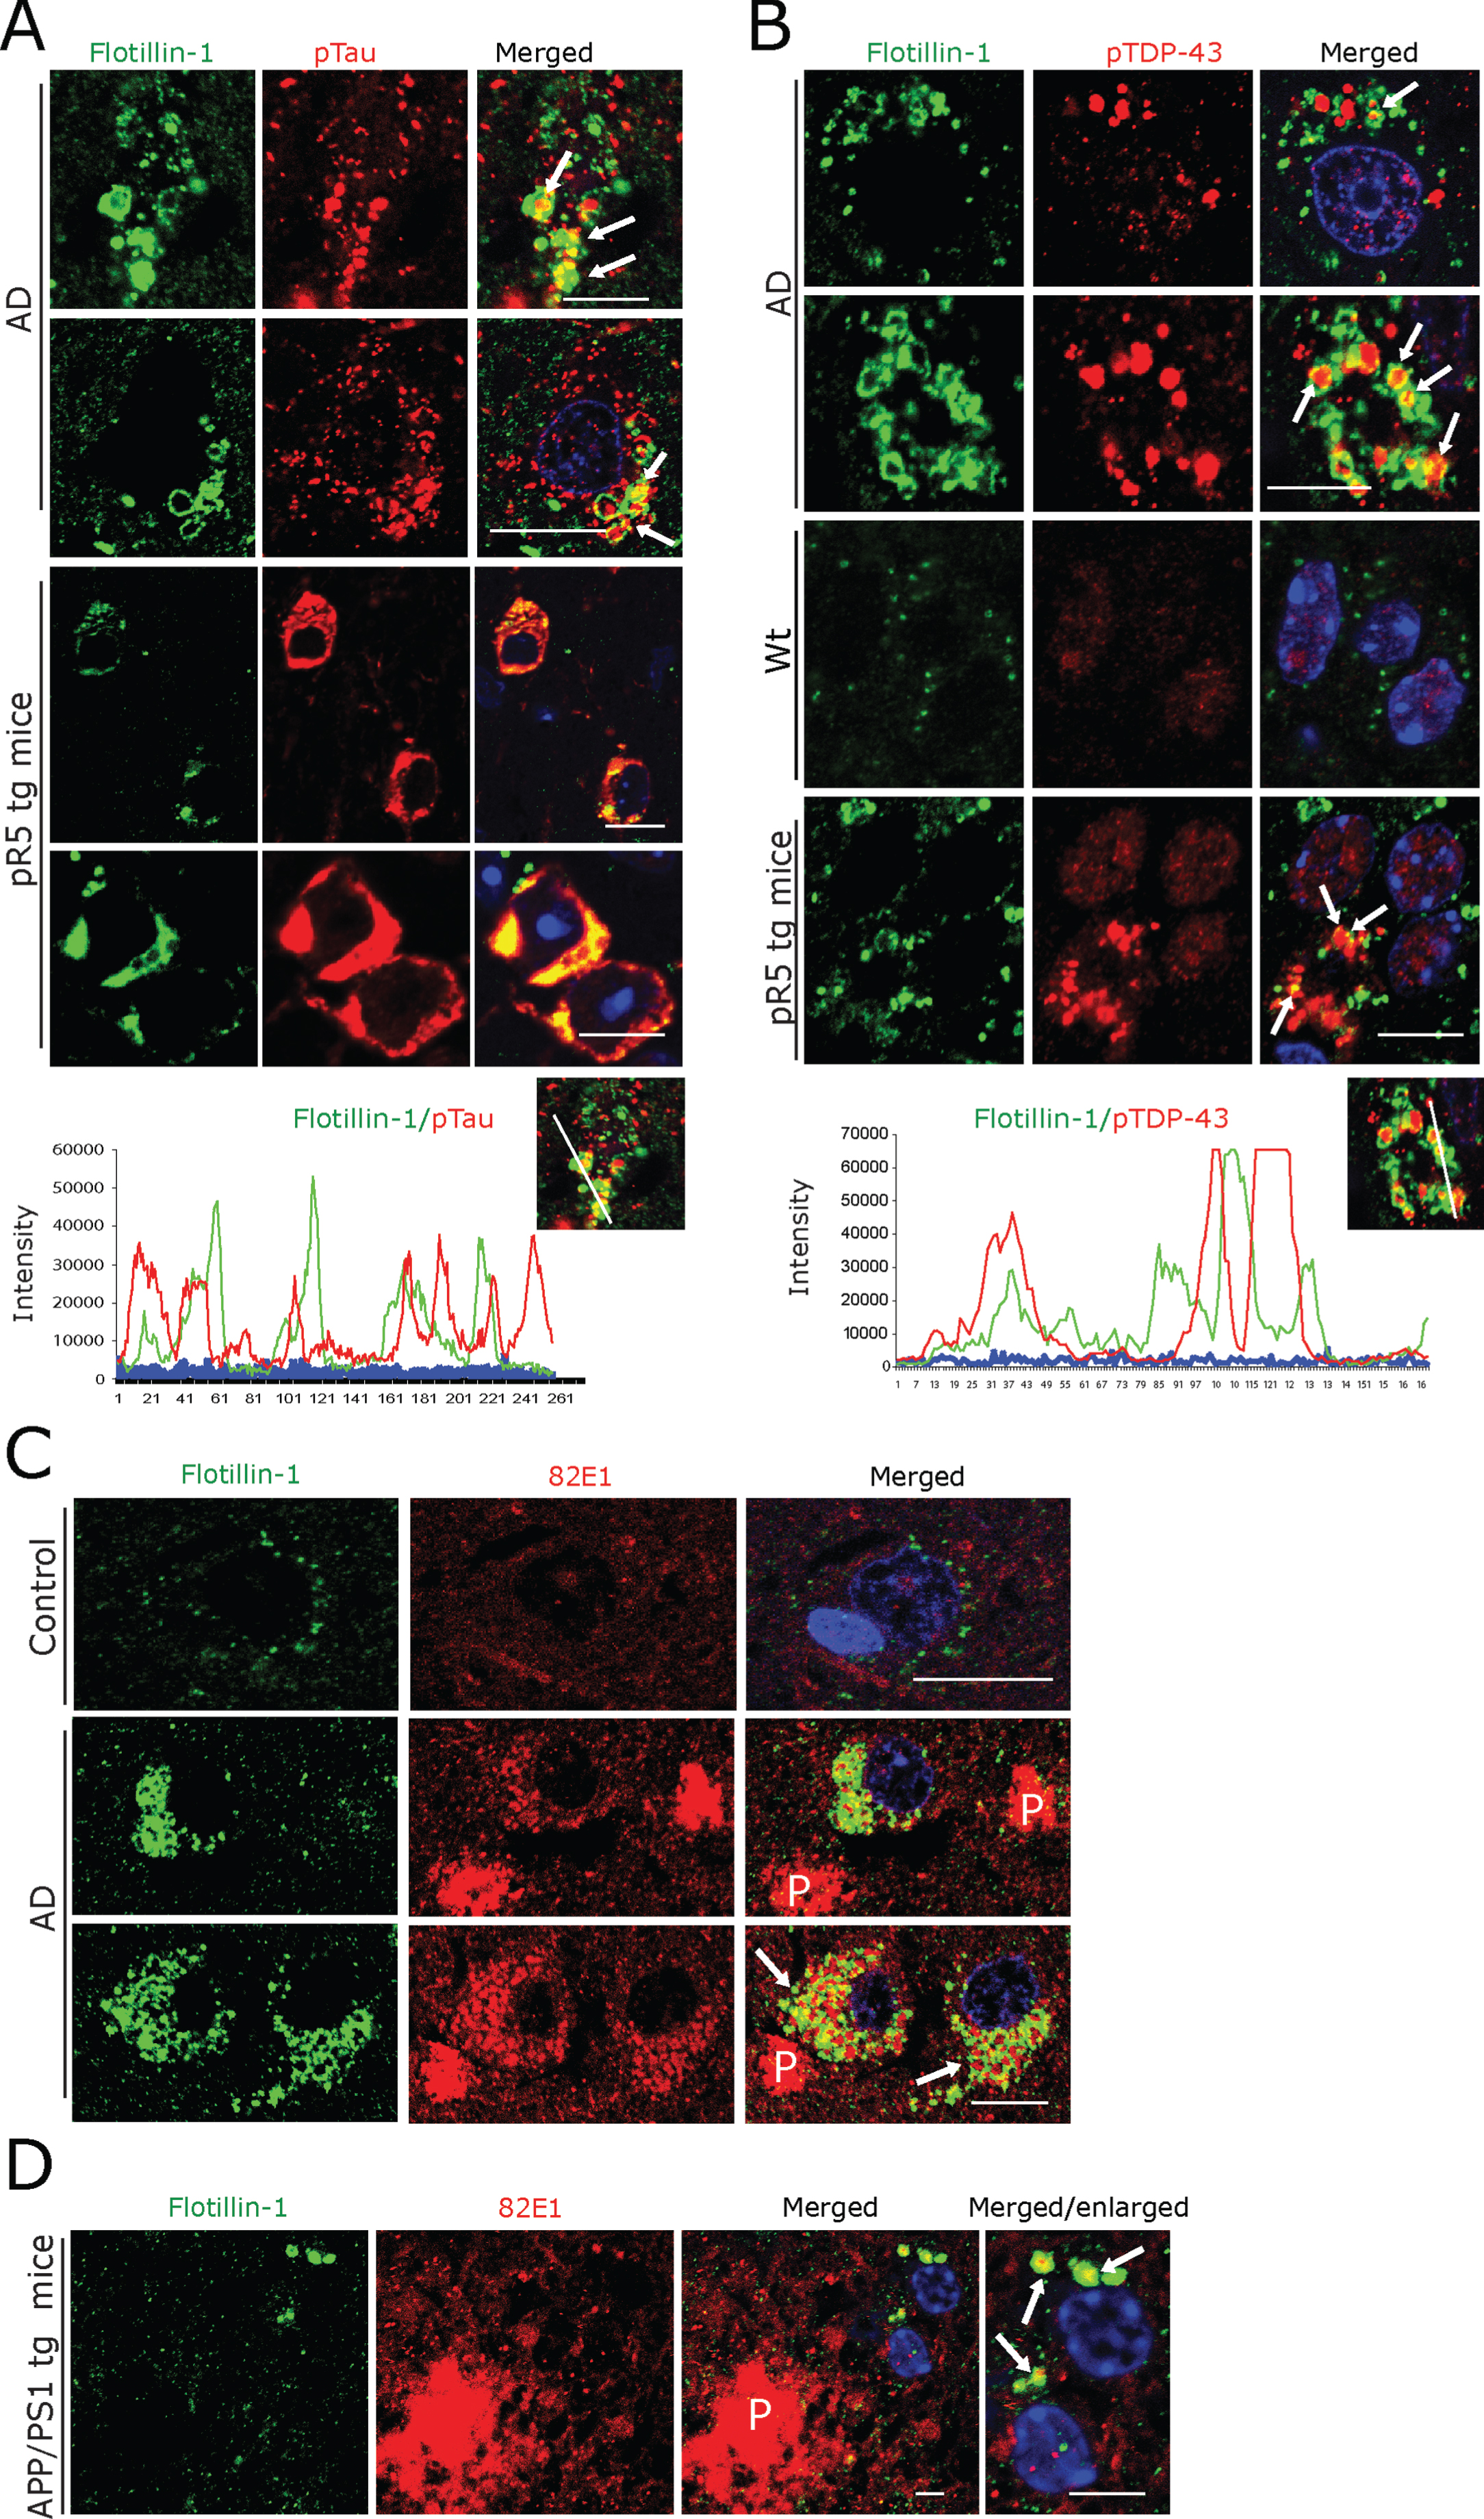 A, B) Double immunofluorescence for Flotillin-1 together with pTau- (A) and pTDP-43 (B), demonstrating that these aggregates are often co-localized with and/or are enclosed by Flotillin-1 labeled vesicles (arrows) in AD patient subicular and in pR5 tg mice CA1-subicular (lower panels), neurons, maximum intensity projections (below) to show the co-localization. Scale bars: 15μm. C) Double immunofluorescence of Aβ oligomer (82E1 antibody) and Flotillin-1. There was a rather rare, somewhat arbitrary coincidence of Flotillin-1-labeled structures with 82E1 immunoreactivity within human AD subicular neurons (arrows) in the vicinity of 82E1-labeled Aβ plaques (P). Scale bars: 15μm. D) In APP/PS1 tg mice 82E1 immunoreactive intracellular material is often co-localized with Flotillin-1-labeled vesicles (arrows) within subicular neurons in the vicinity of Aβ plaques (P). Scale bars: 10μm.